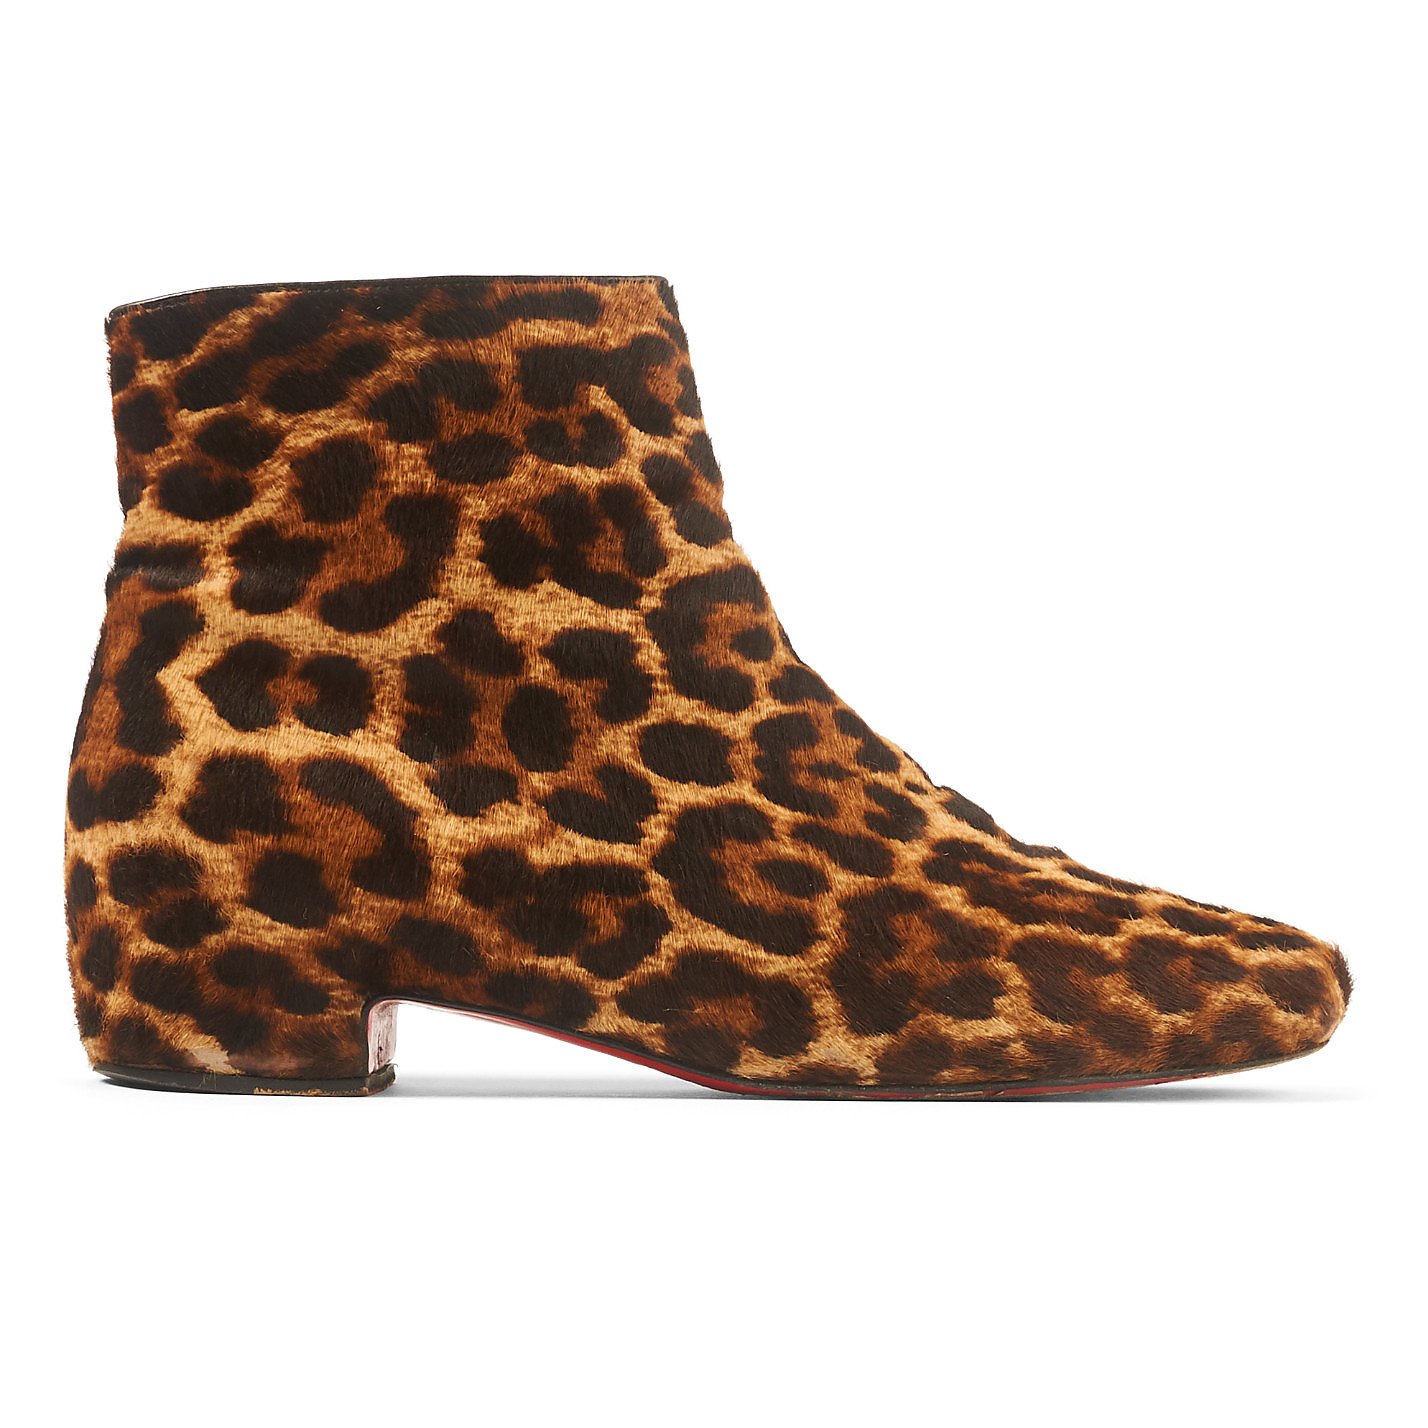 Rent or Christian Leopard Print Ankle Boots from MyWardrobeHQ.com